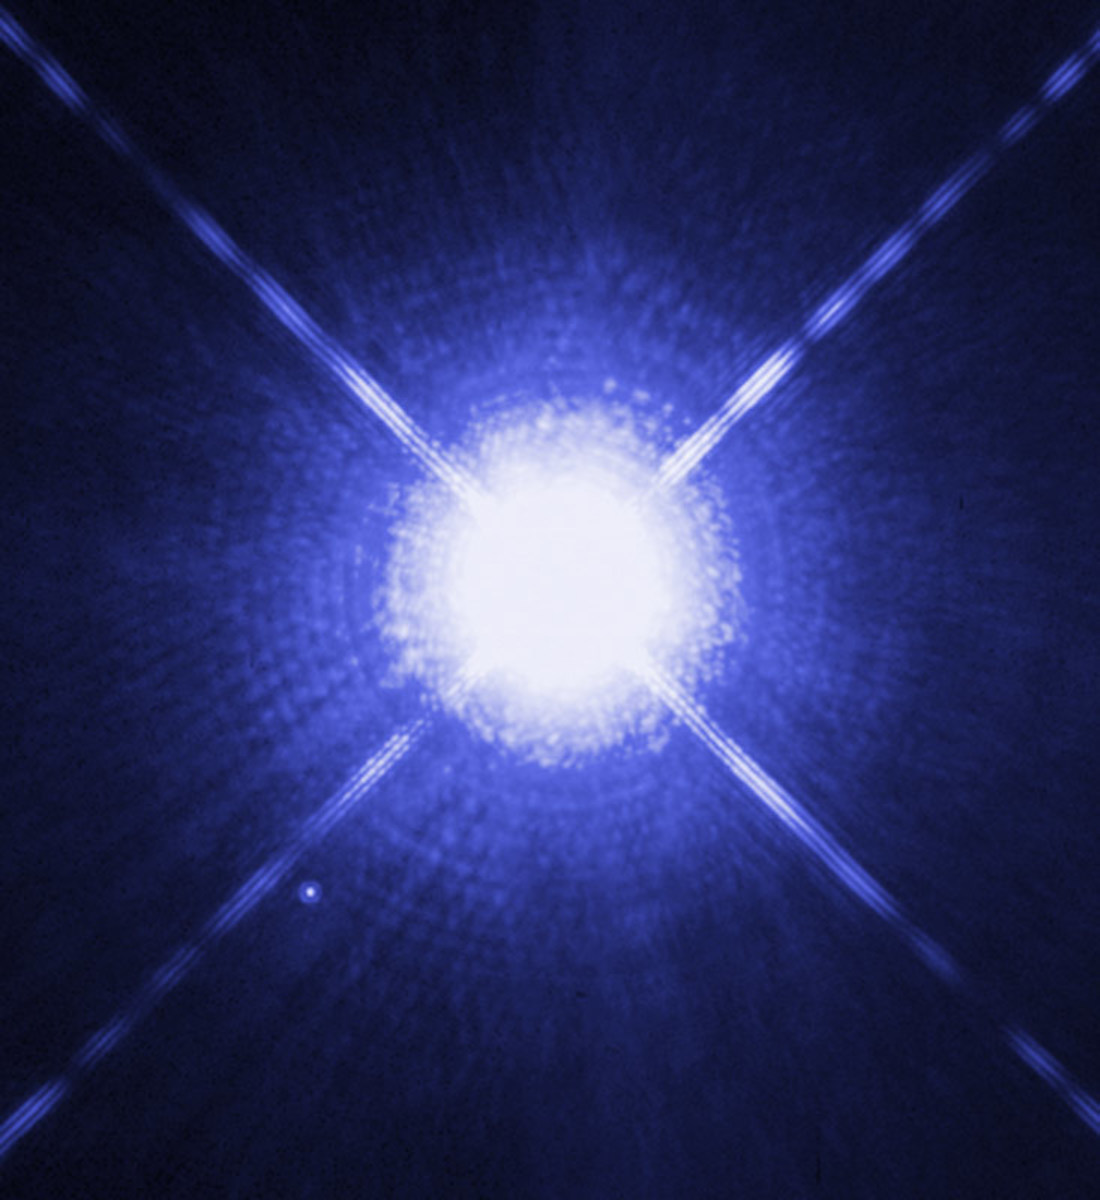 The tiny companion of Sirius A is a white dwarf called Sirius B (see lower left).